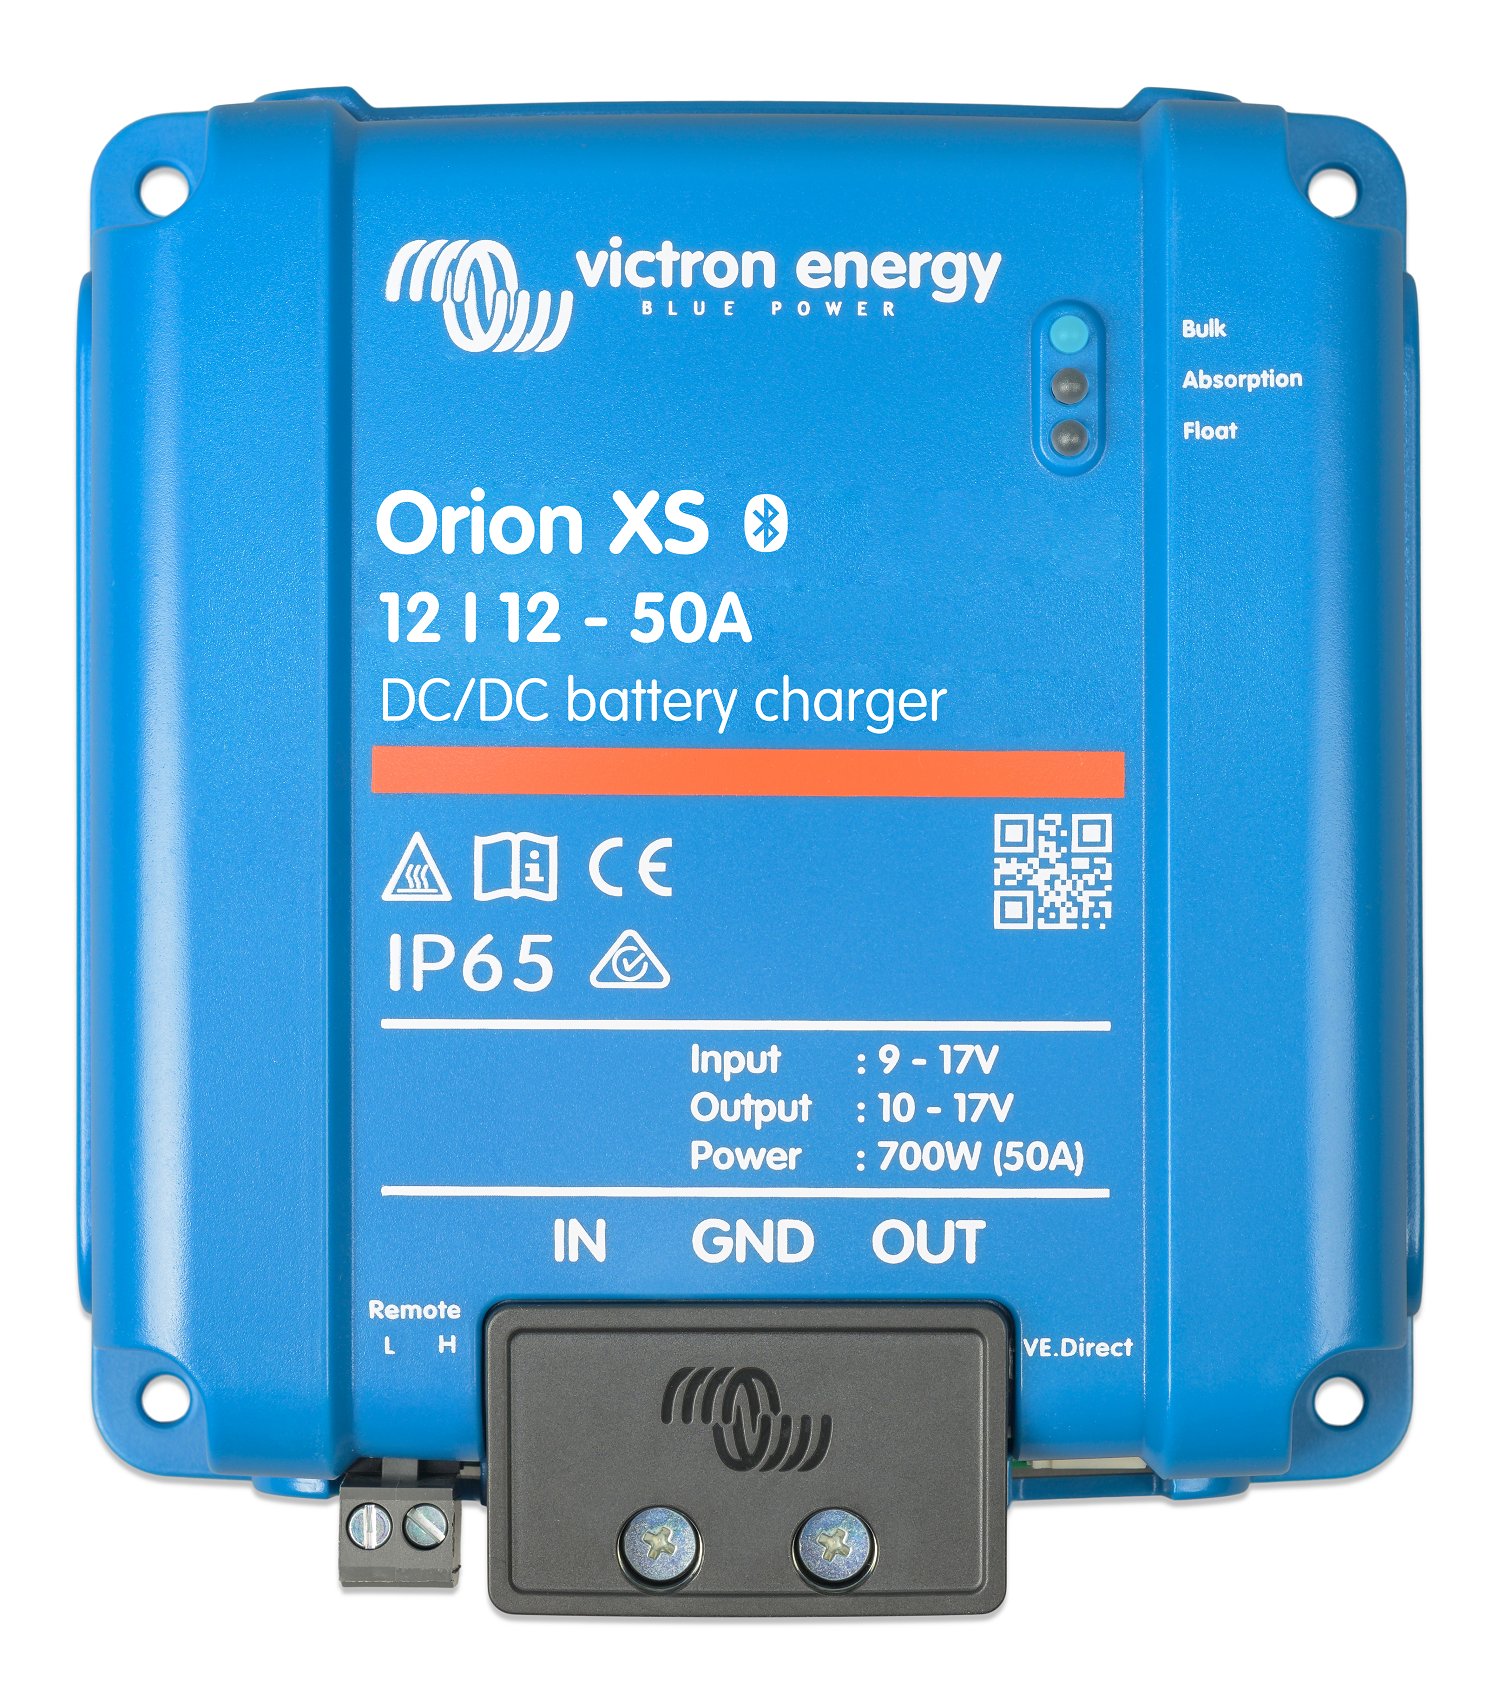 Will the Victron Orion XS work with older, non-intelligent alternators?